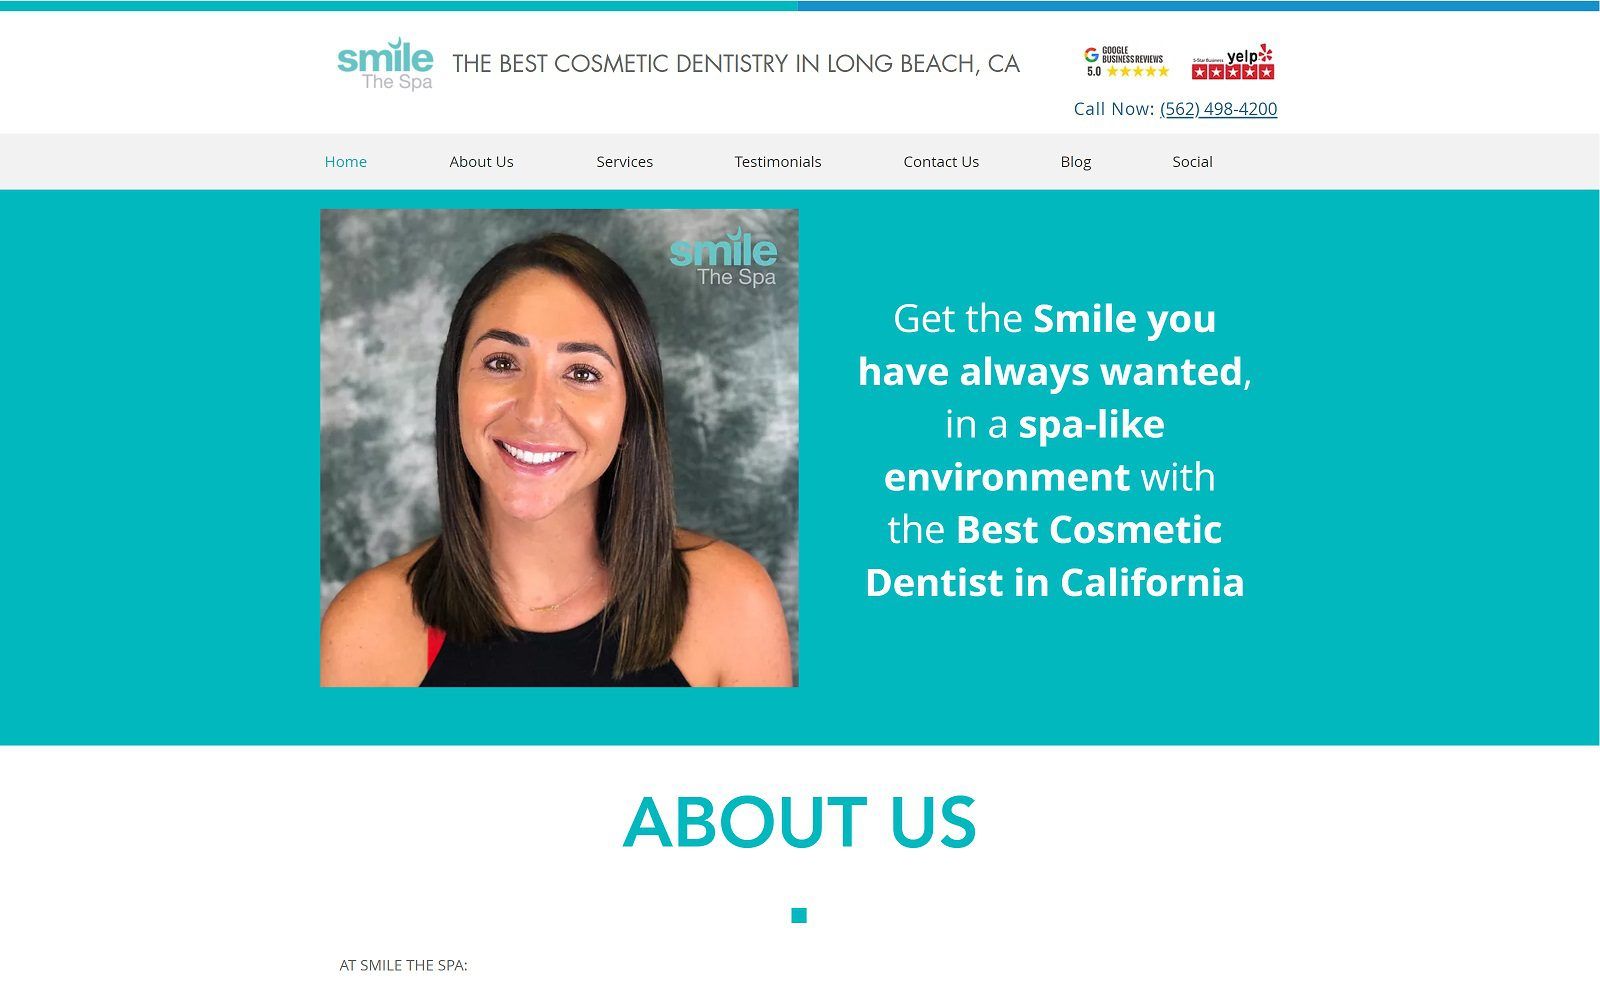 The screenshot of smile the spa - dr. Julio terra dds website